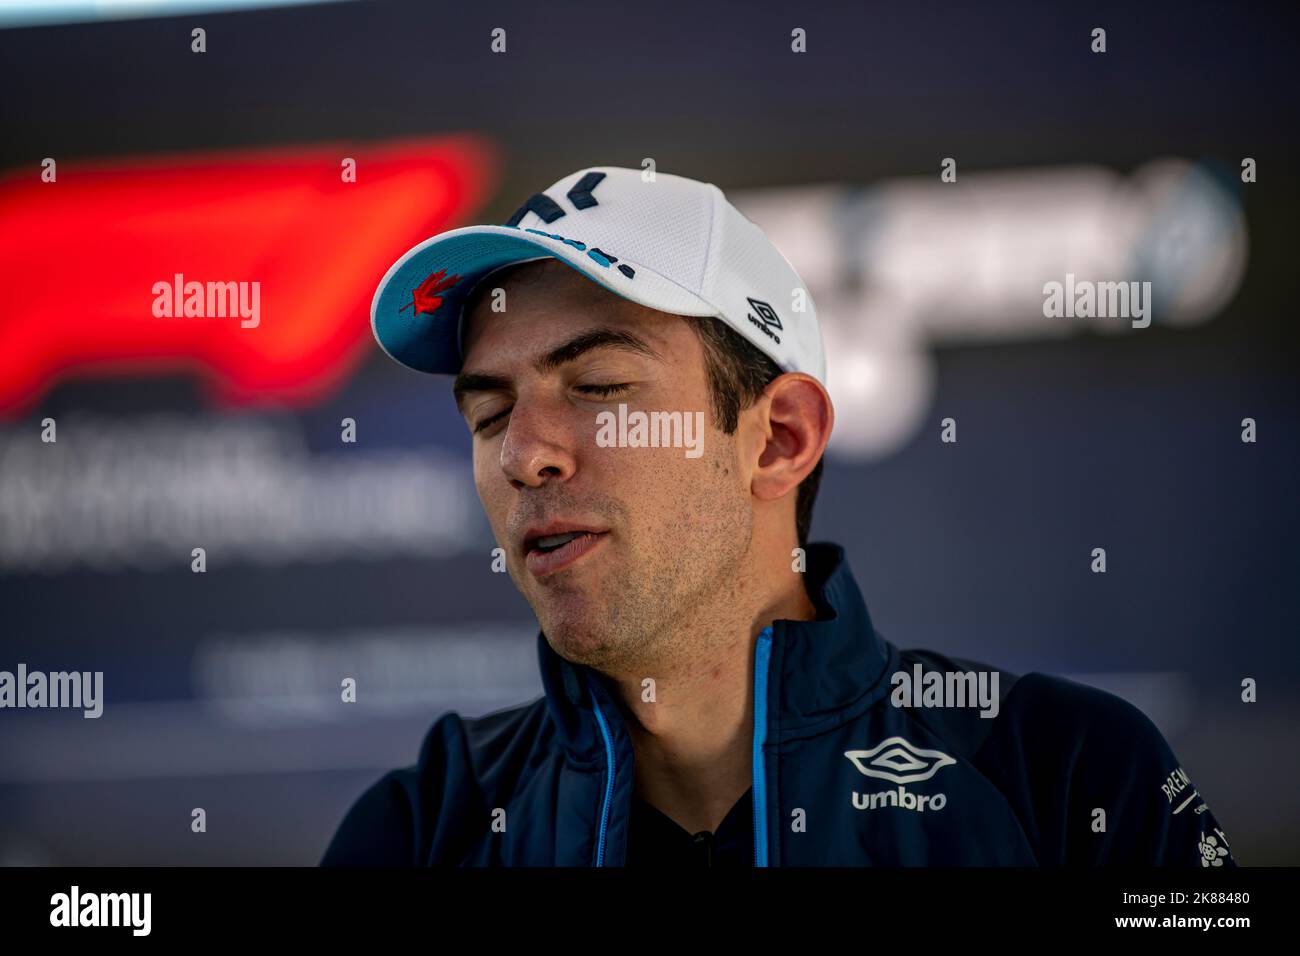 Austin, Texas, United States, 21st Oct 2022, Nicholas Latifi, from Canada competes for Williams Racing. The build up, round 19 of the 2022 Formula 1 championship. Credit: Michael Potts/Alamy Live News Stock Photo